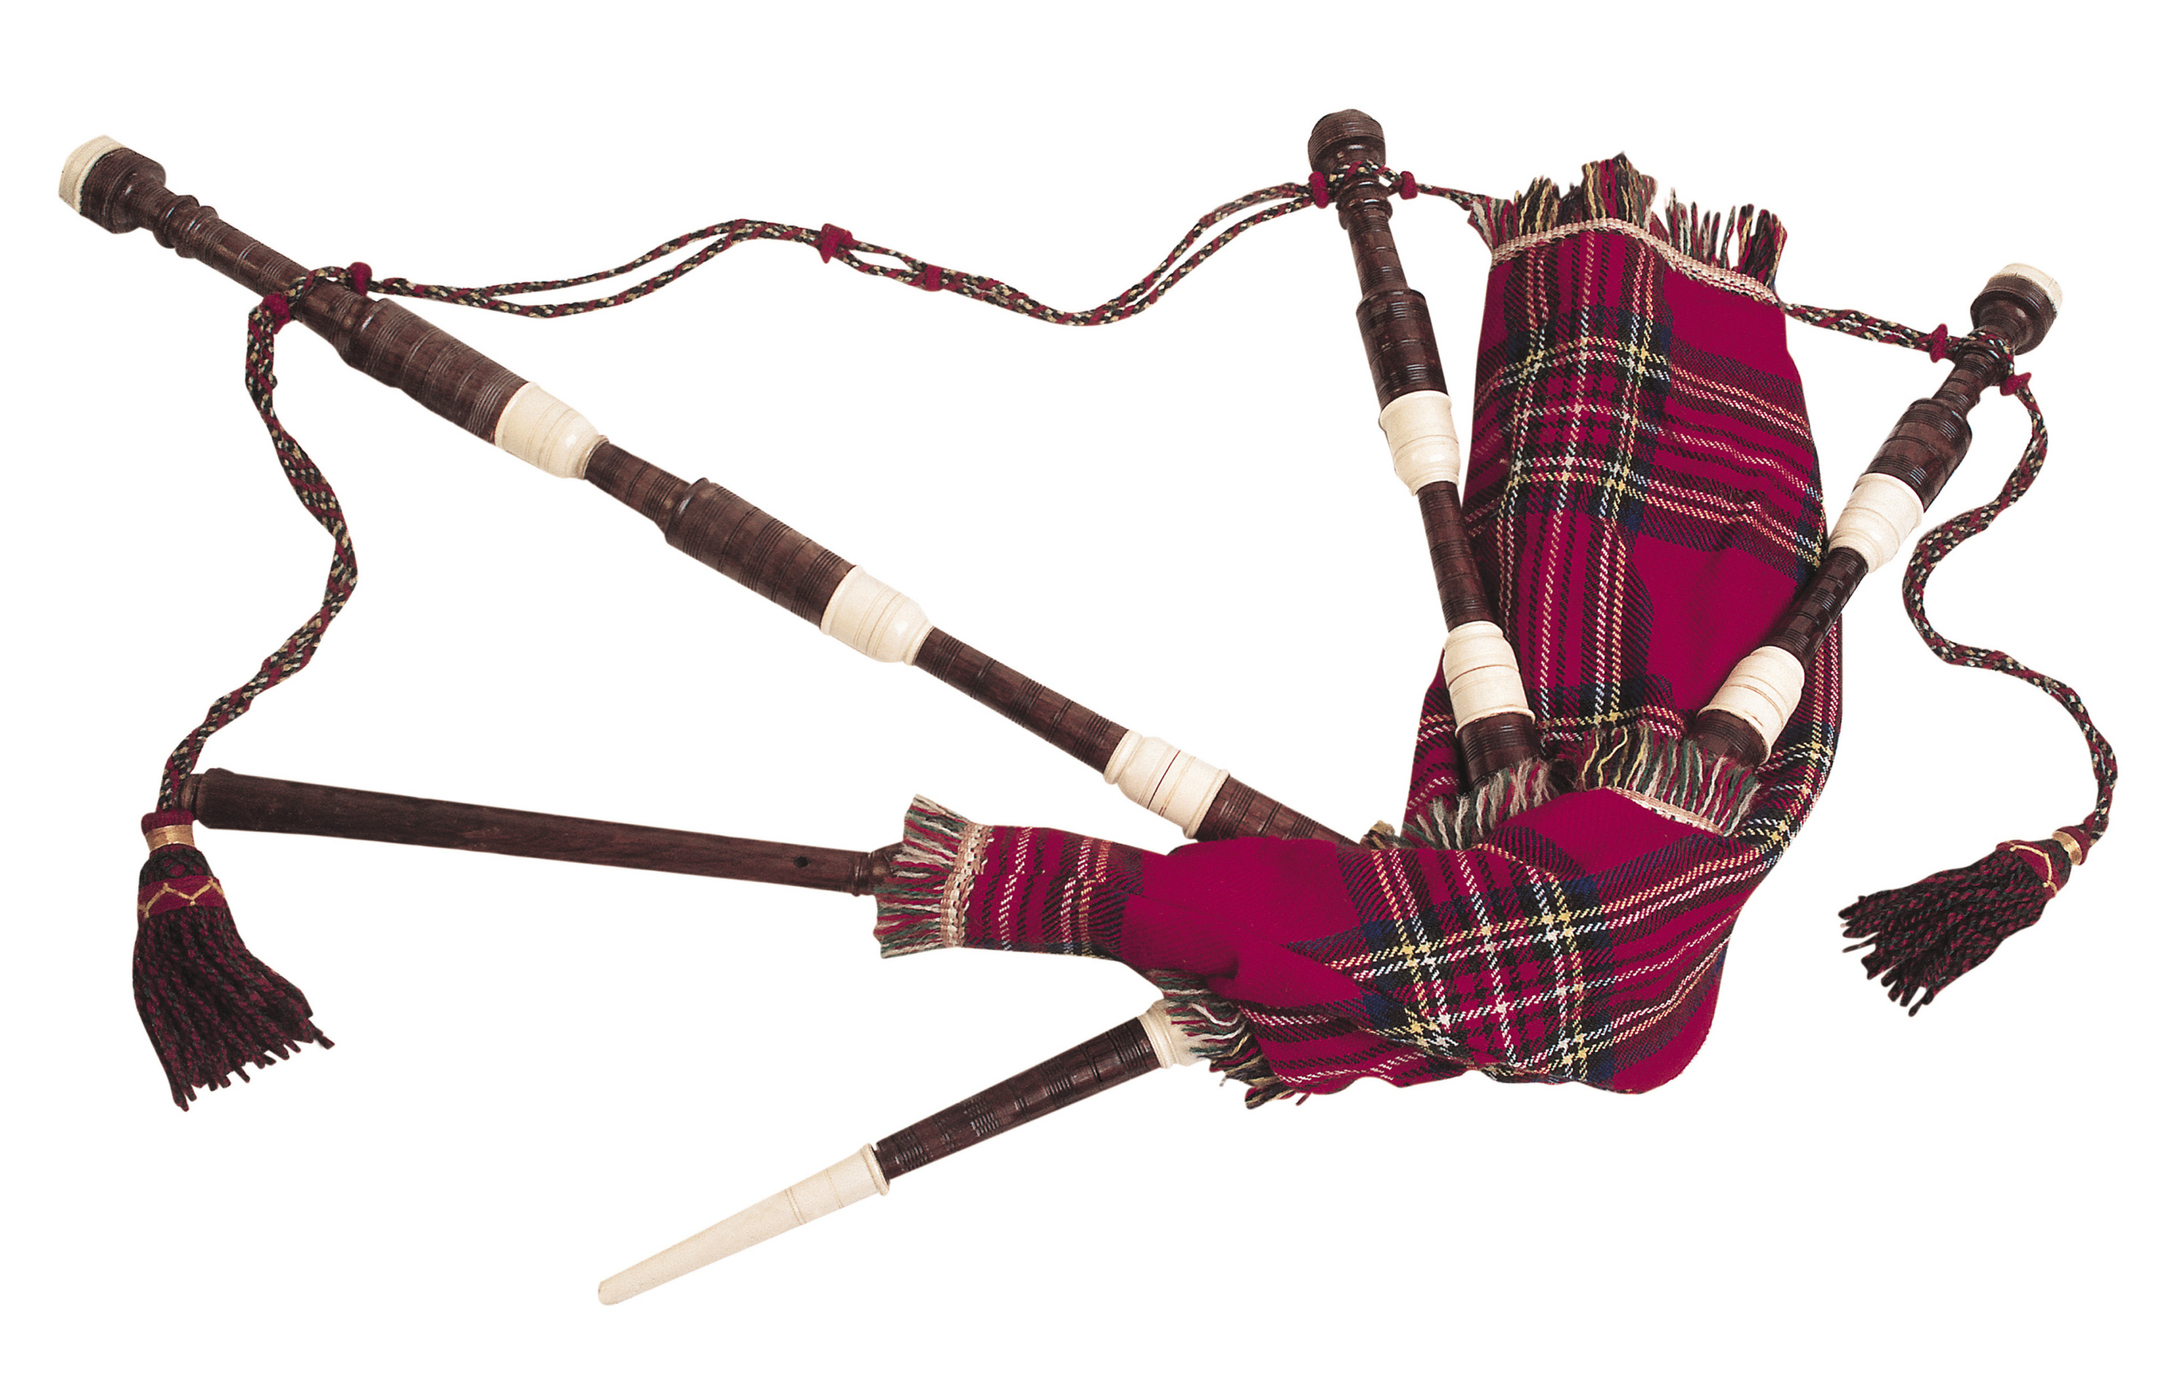 Bagpipes and a tartan scarf